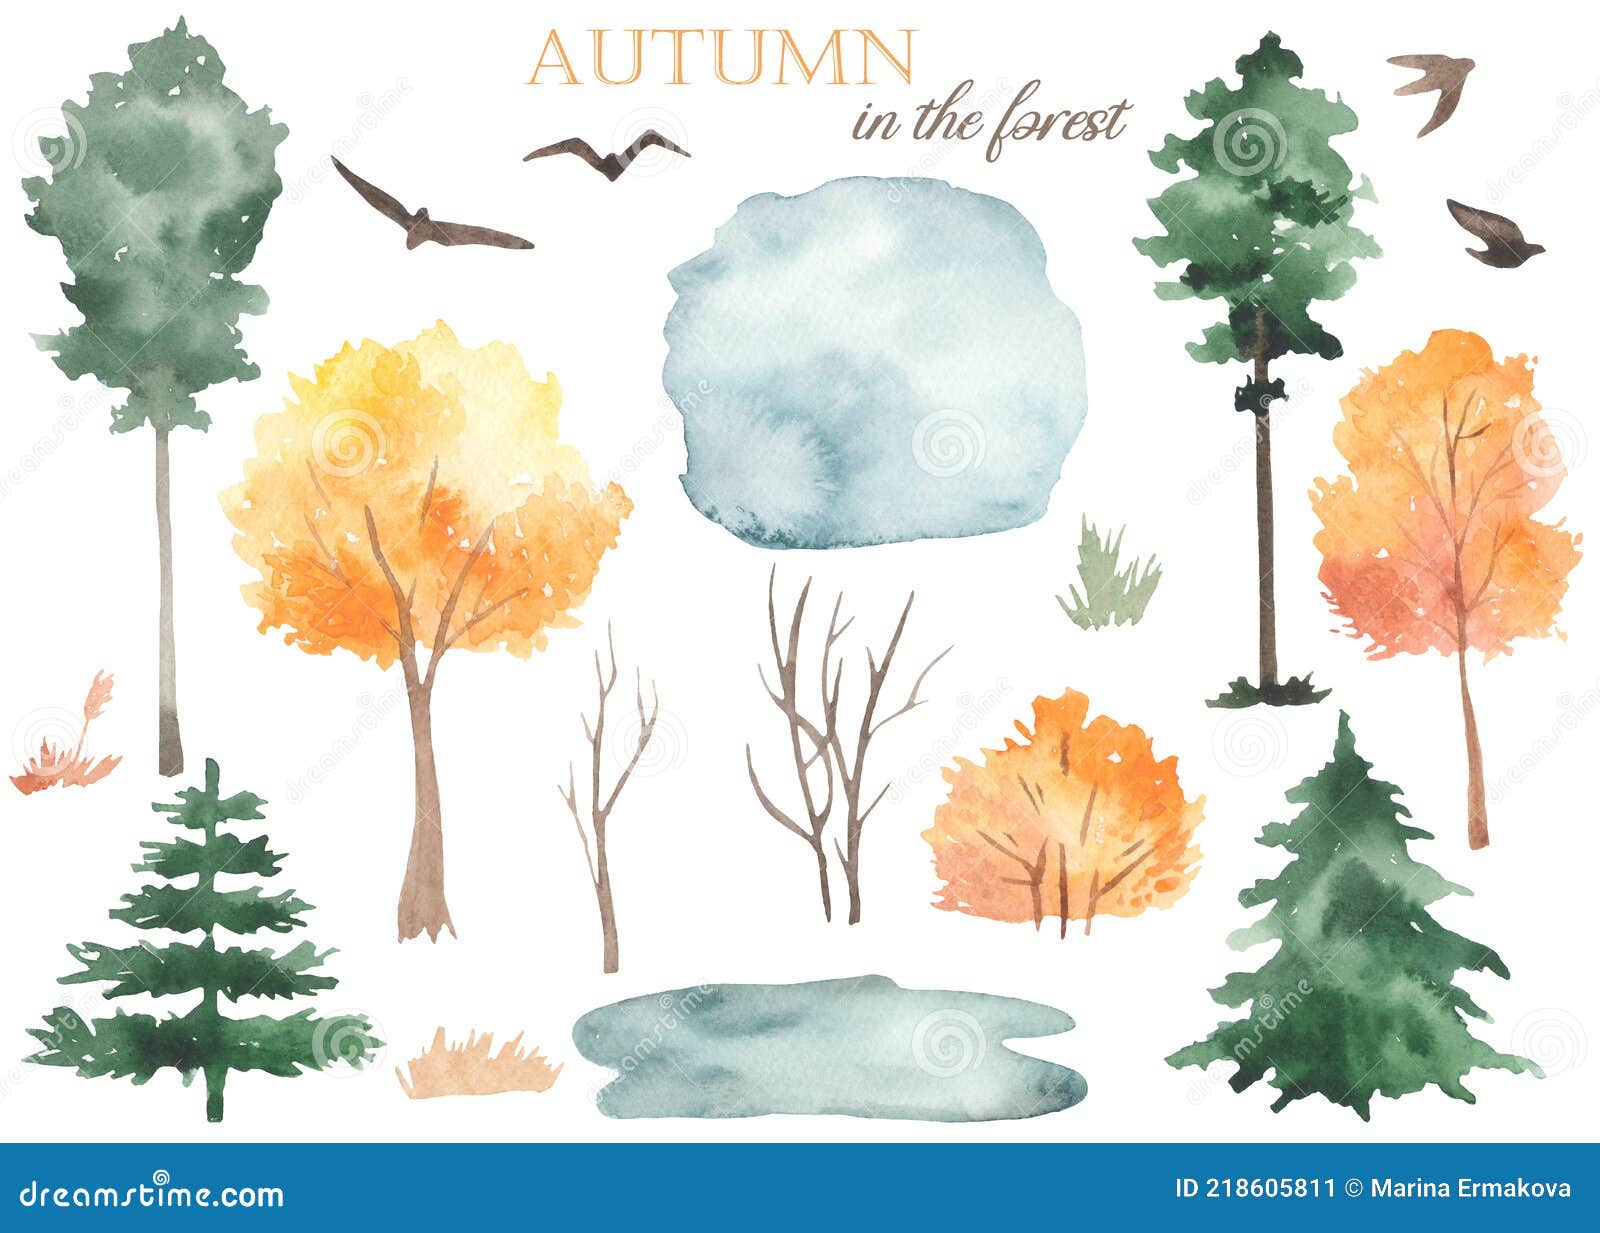 watercolor set with autumn trees, bushes, pines, fir trees, puddle, grass, migratory birds